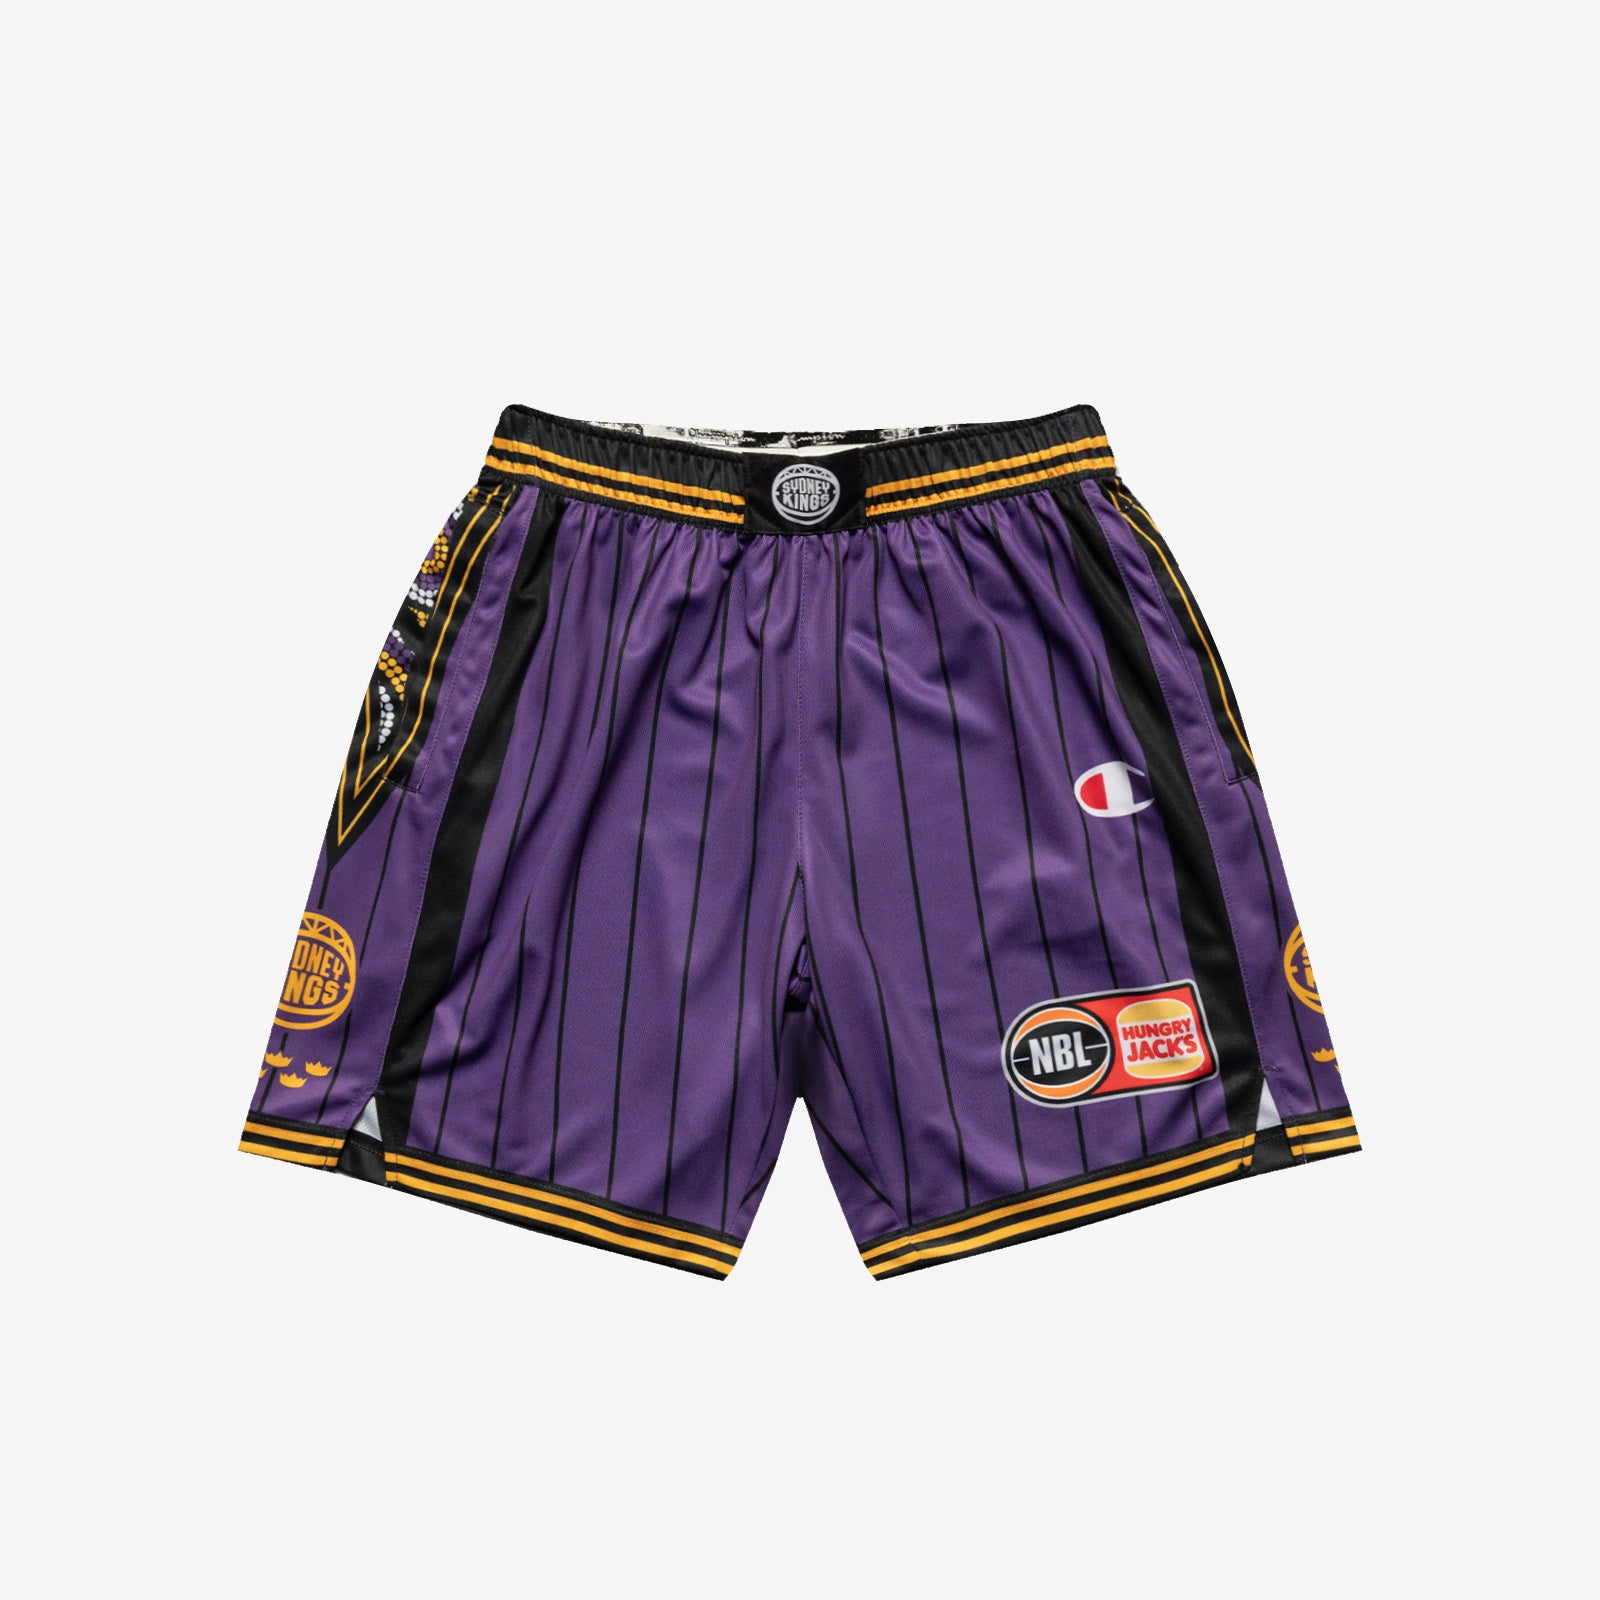 Official Golden State Warriors Shorts, Basketball Shorts, Gym Shorts,  Compression Shorts